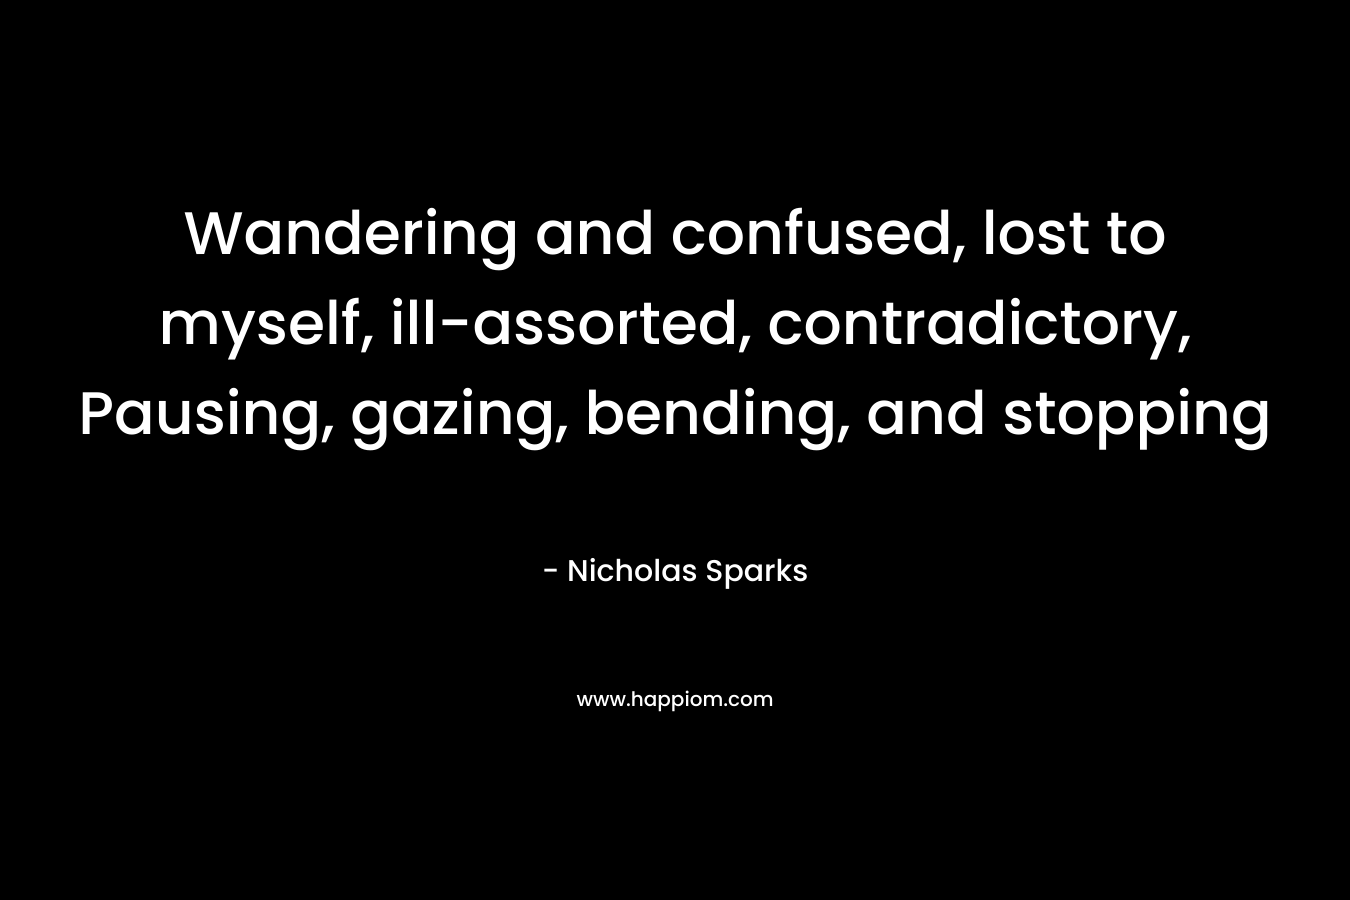 Wandering and confused, lost to myself, ill-assorted, contradictory, Pausing, gazing, bending, and stopping – Nicholas Sparks